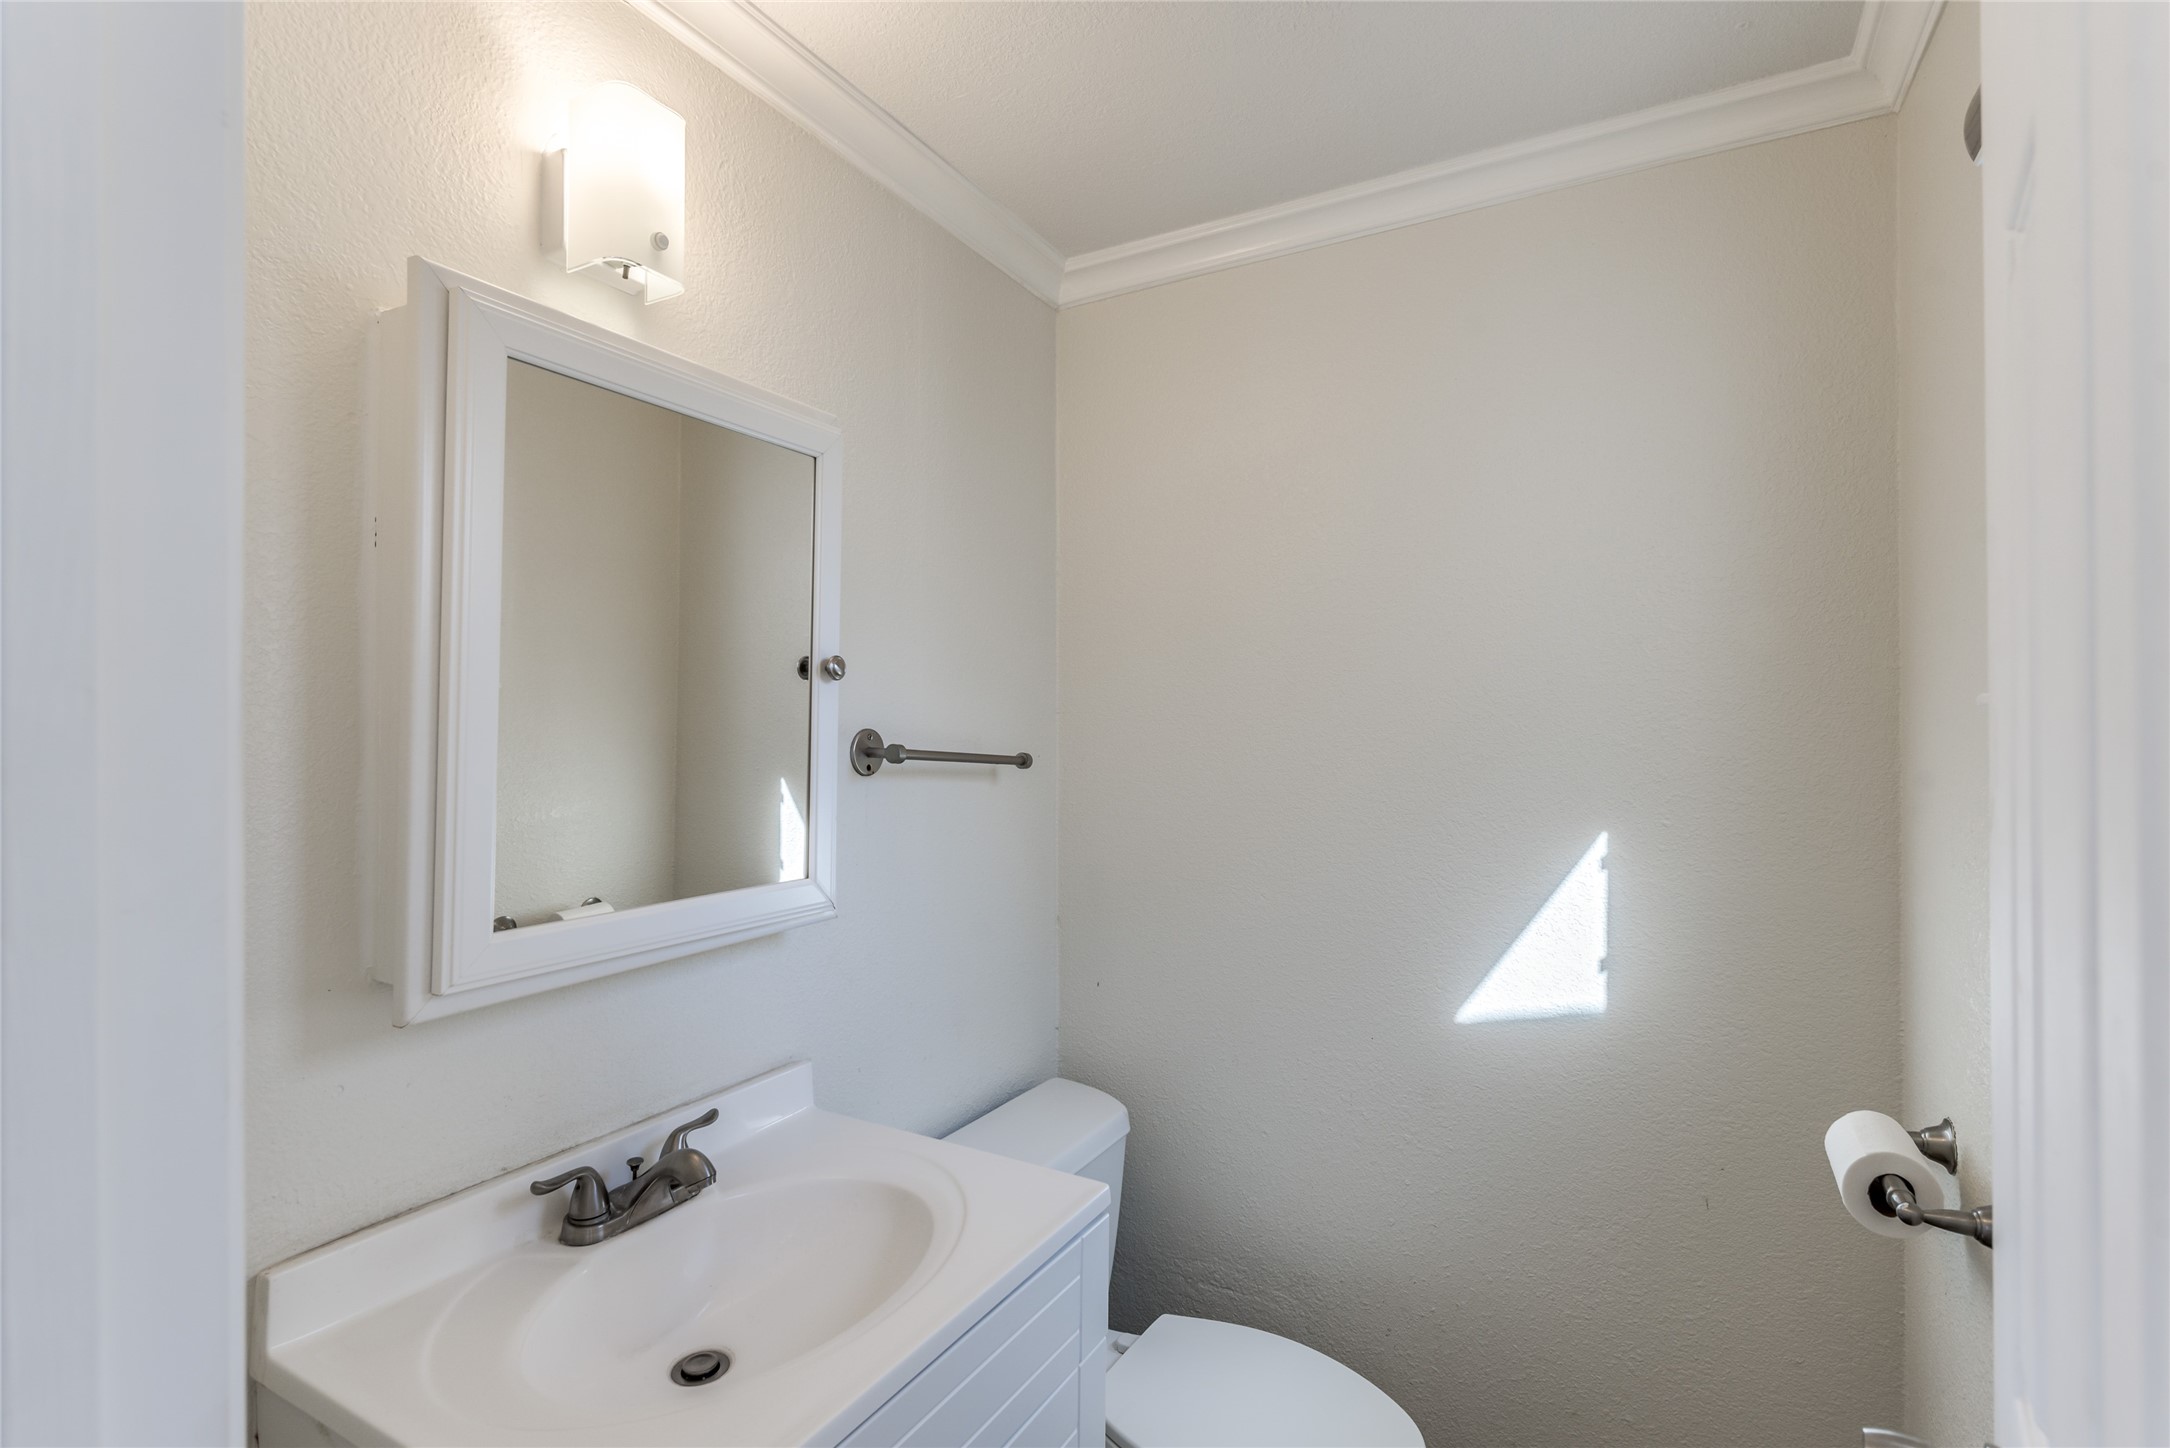 A half bath is conveniently located close to the bonus room, pool area, and in-home laundry room.